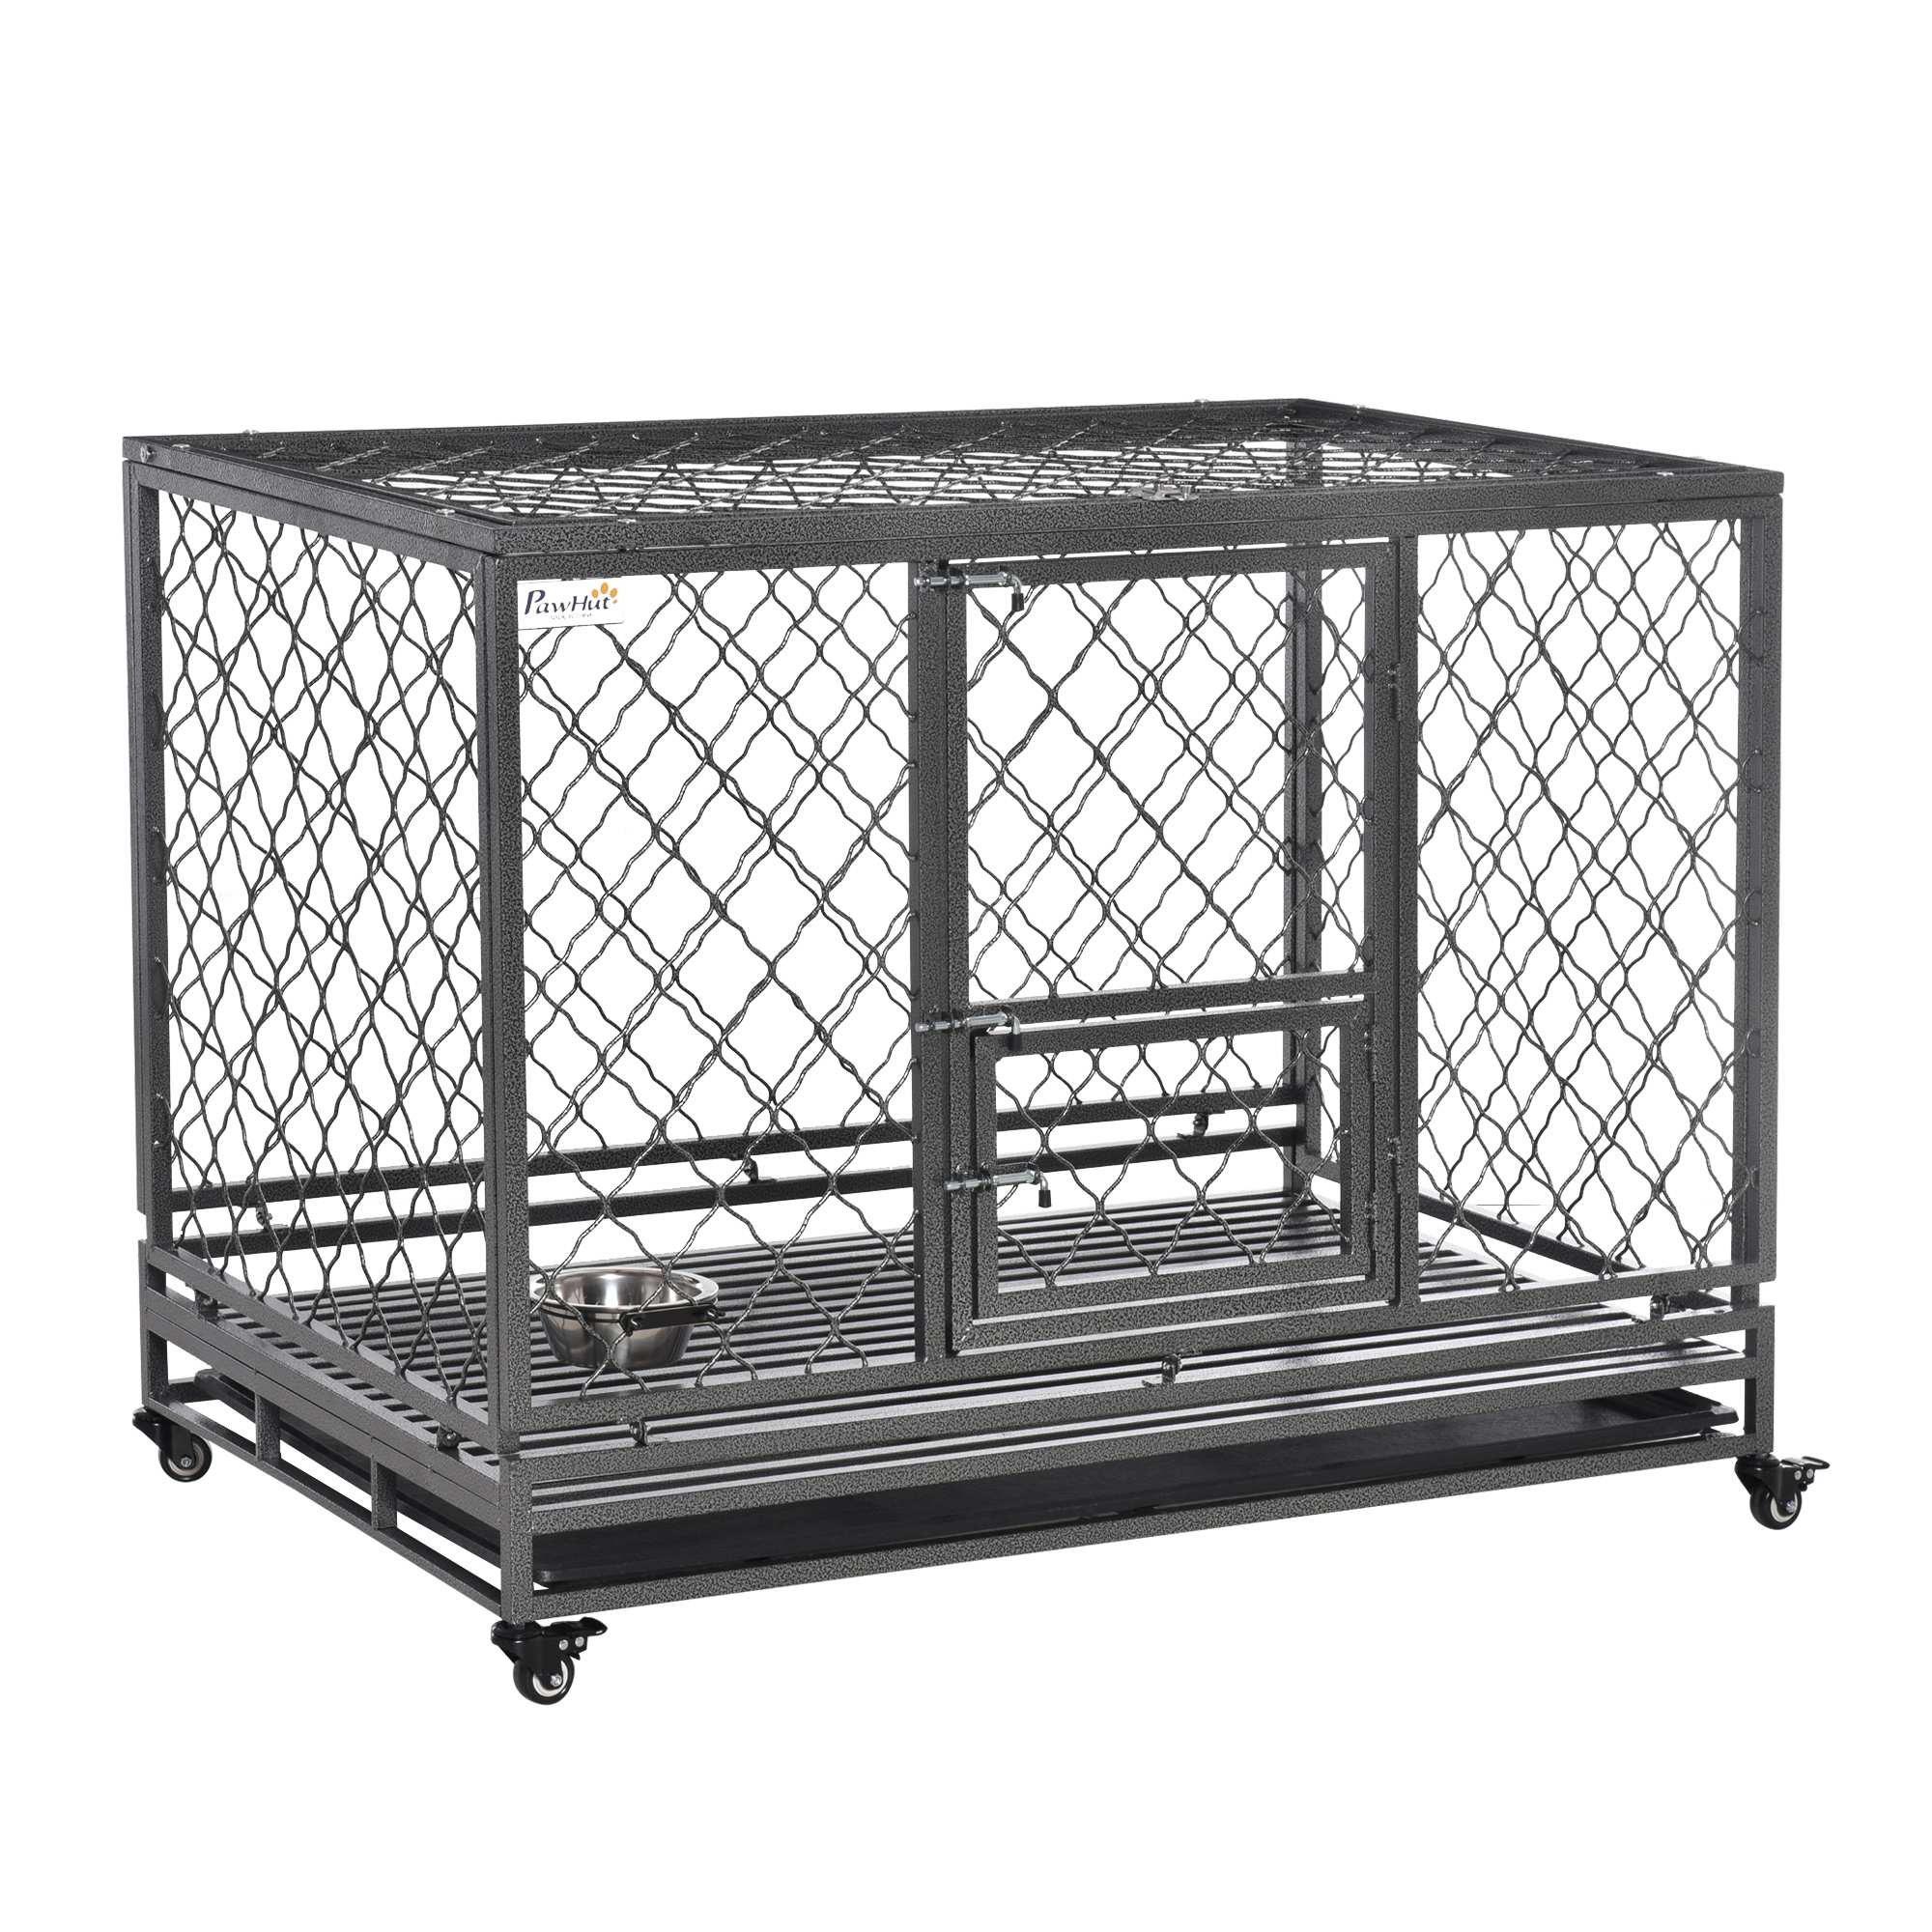 PawHut 49.5" Heavy Duty Dog Cage, Metal Dog Kennel Crate, Dog Playpen with Lockable Wheels, Slide-out Tray, Food Bowl & Double Doors, Black